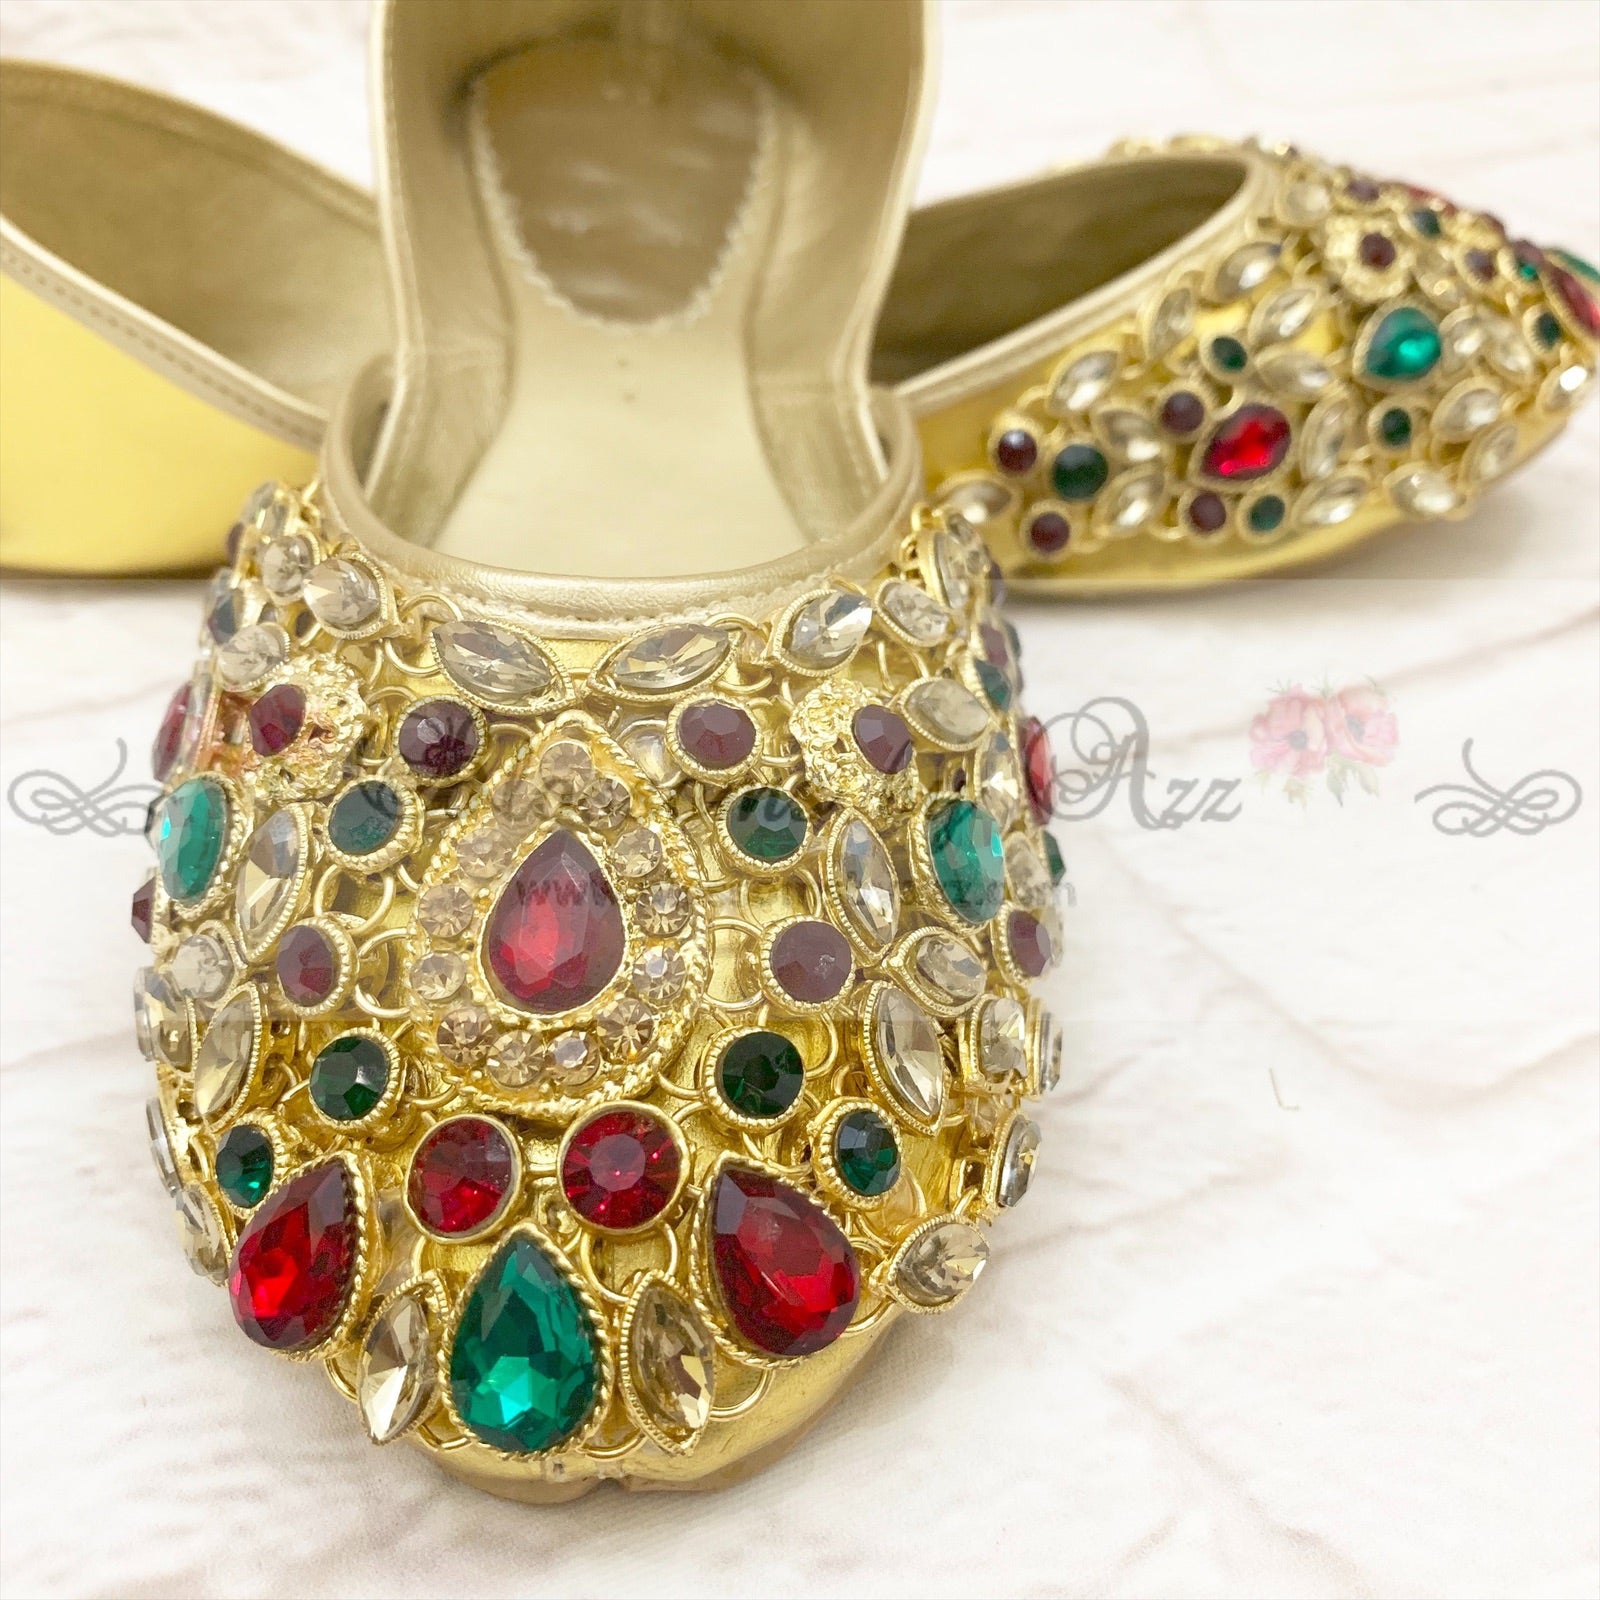 Stone Pumps (Khussa) - 007- Red with Sea Green - Blossoms by Azz